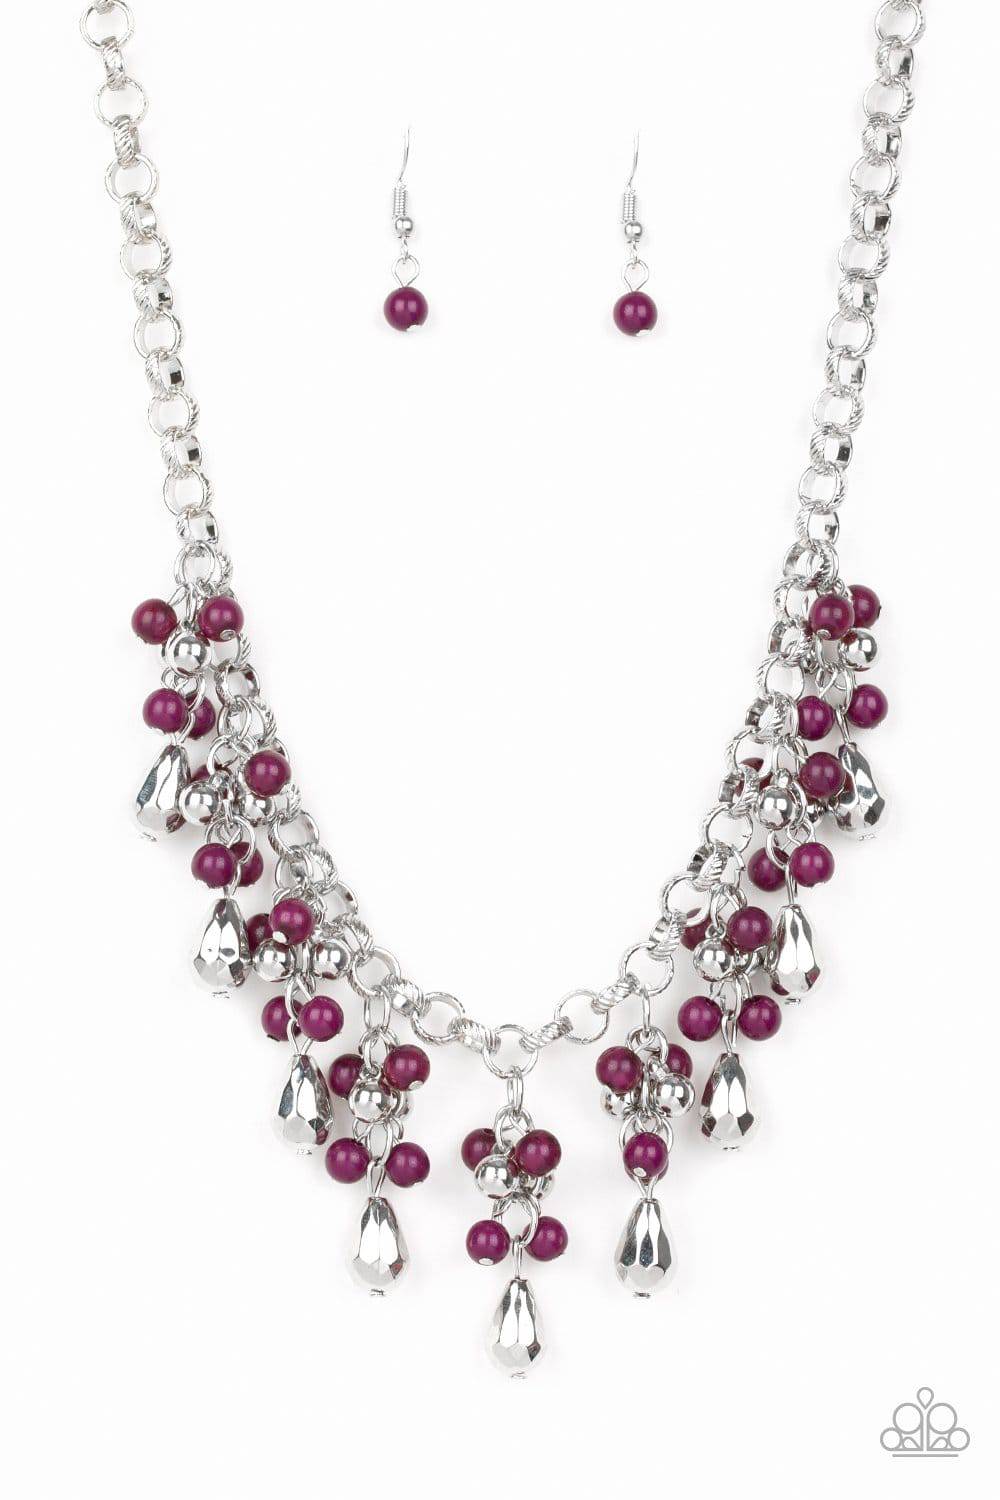 Travelling Trendsetter - Purple & Silver Necklace - Paparazzi Accessories - GlaMarous Titi Jewels